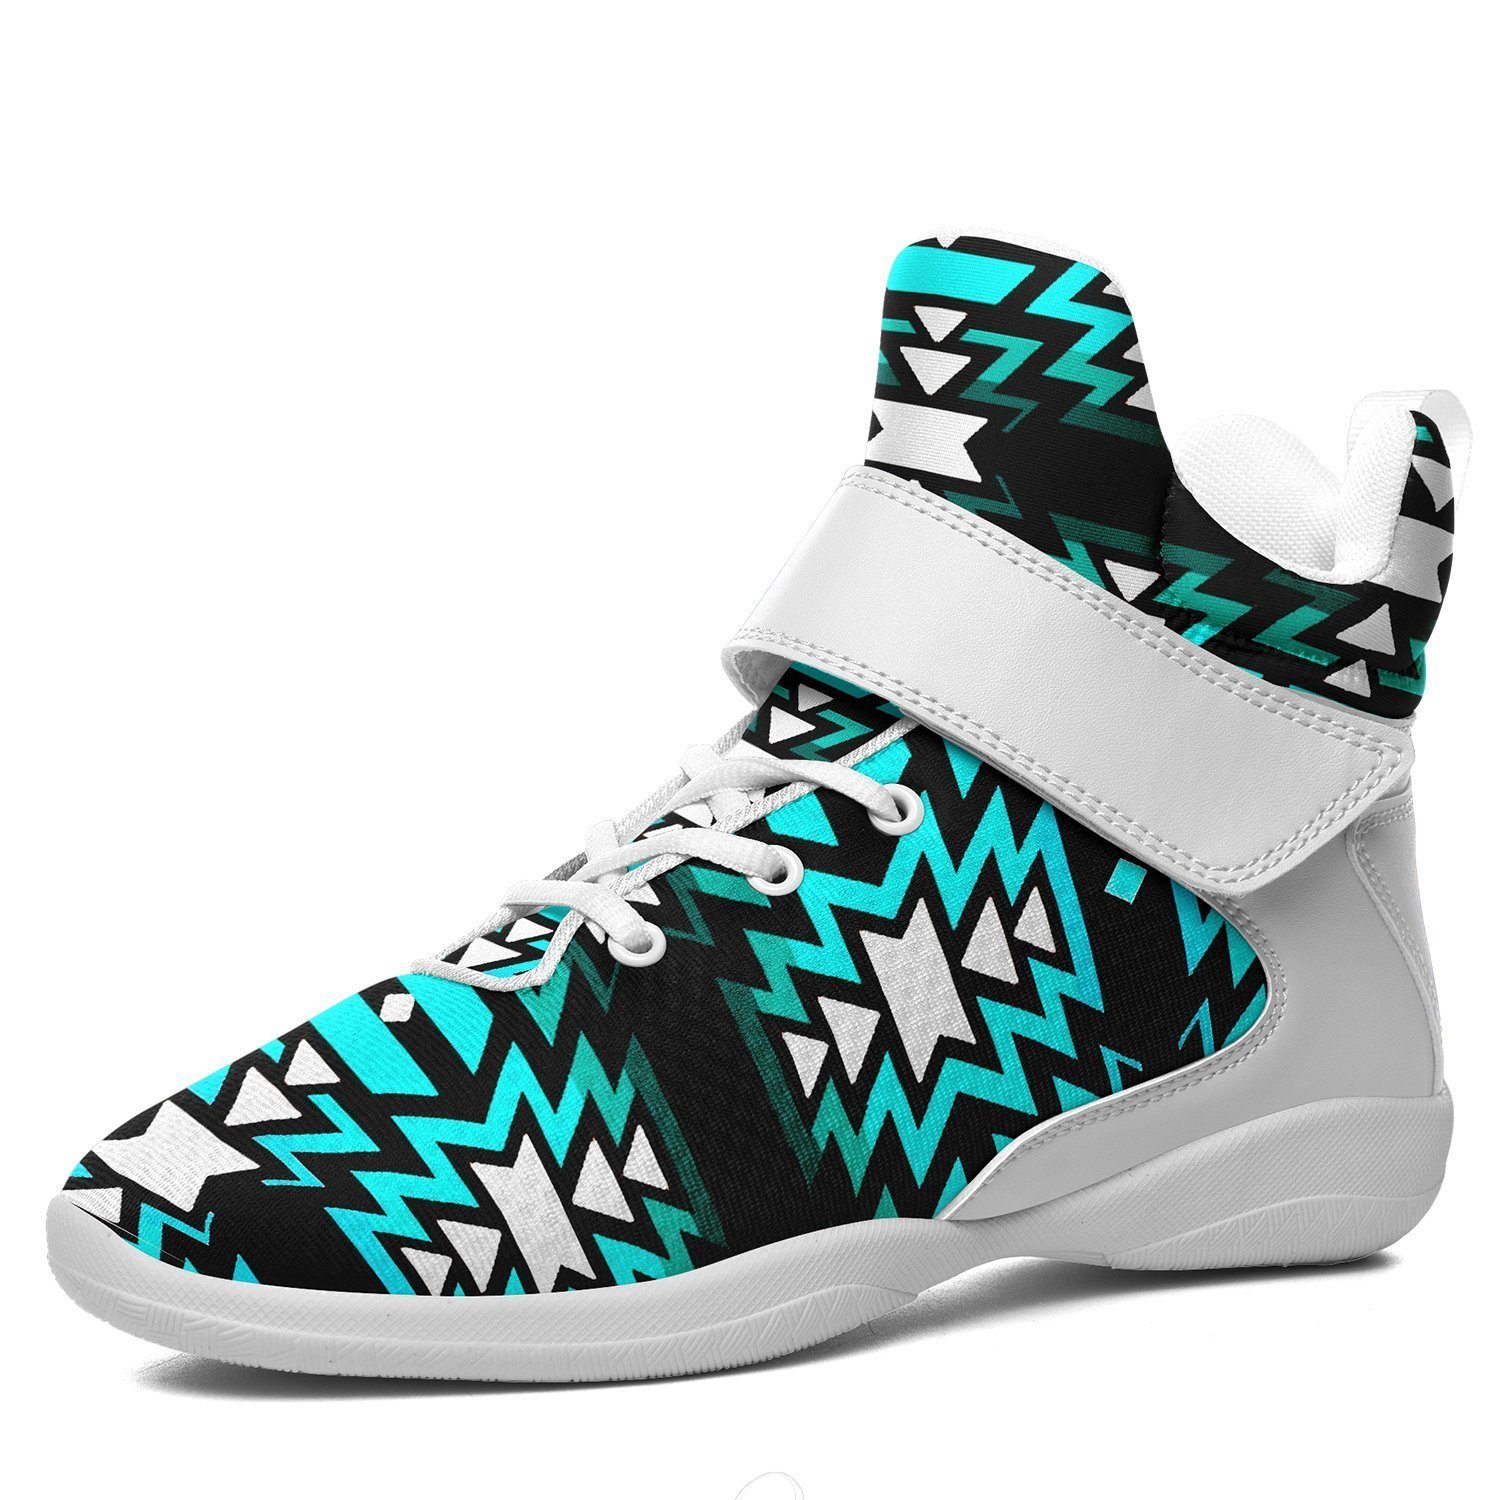 Black Fire Firefly Ipottaa Basketball / Sport High Top Shoes - White Sole 49 Dzine US Men 7 / EUR 40 White Sole with White Strap 